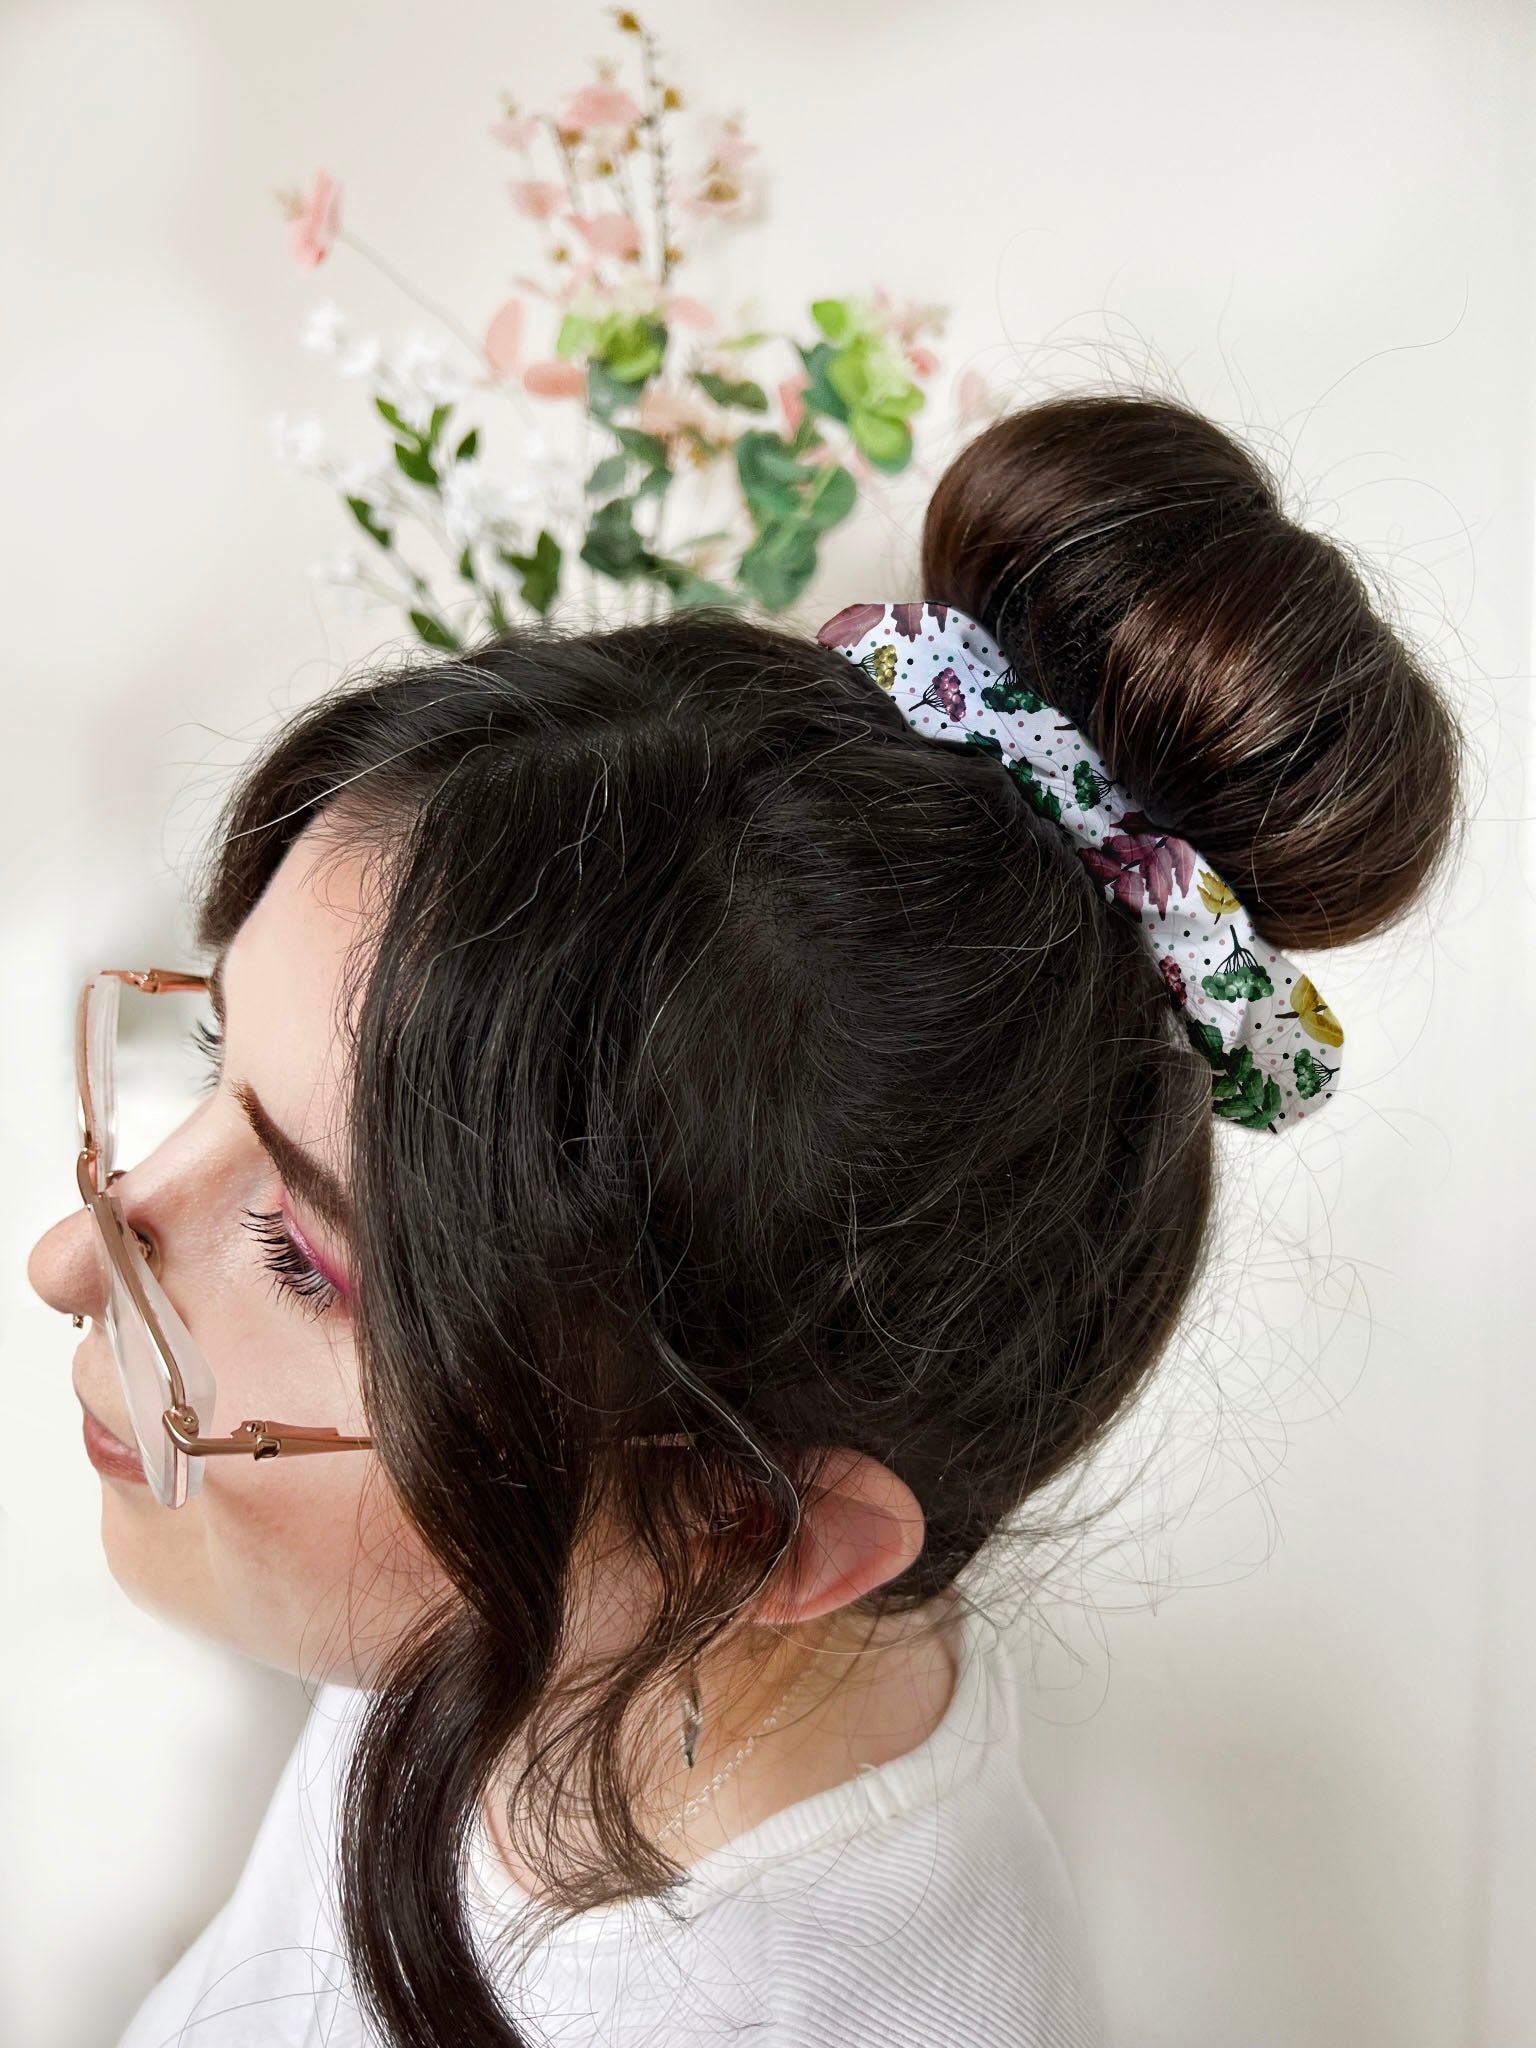 pretty foliage patterned scrunchie on a bun of a dark haired girl with glasses